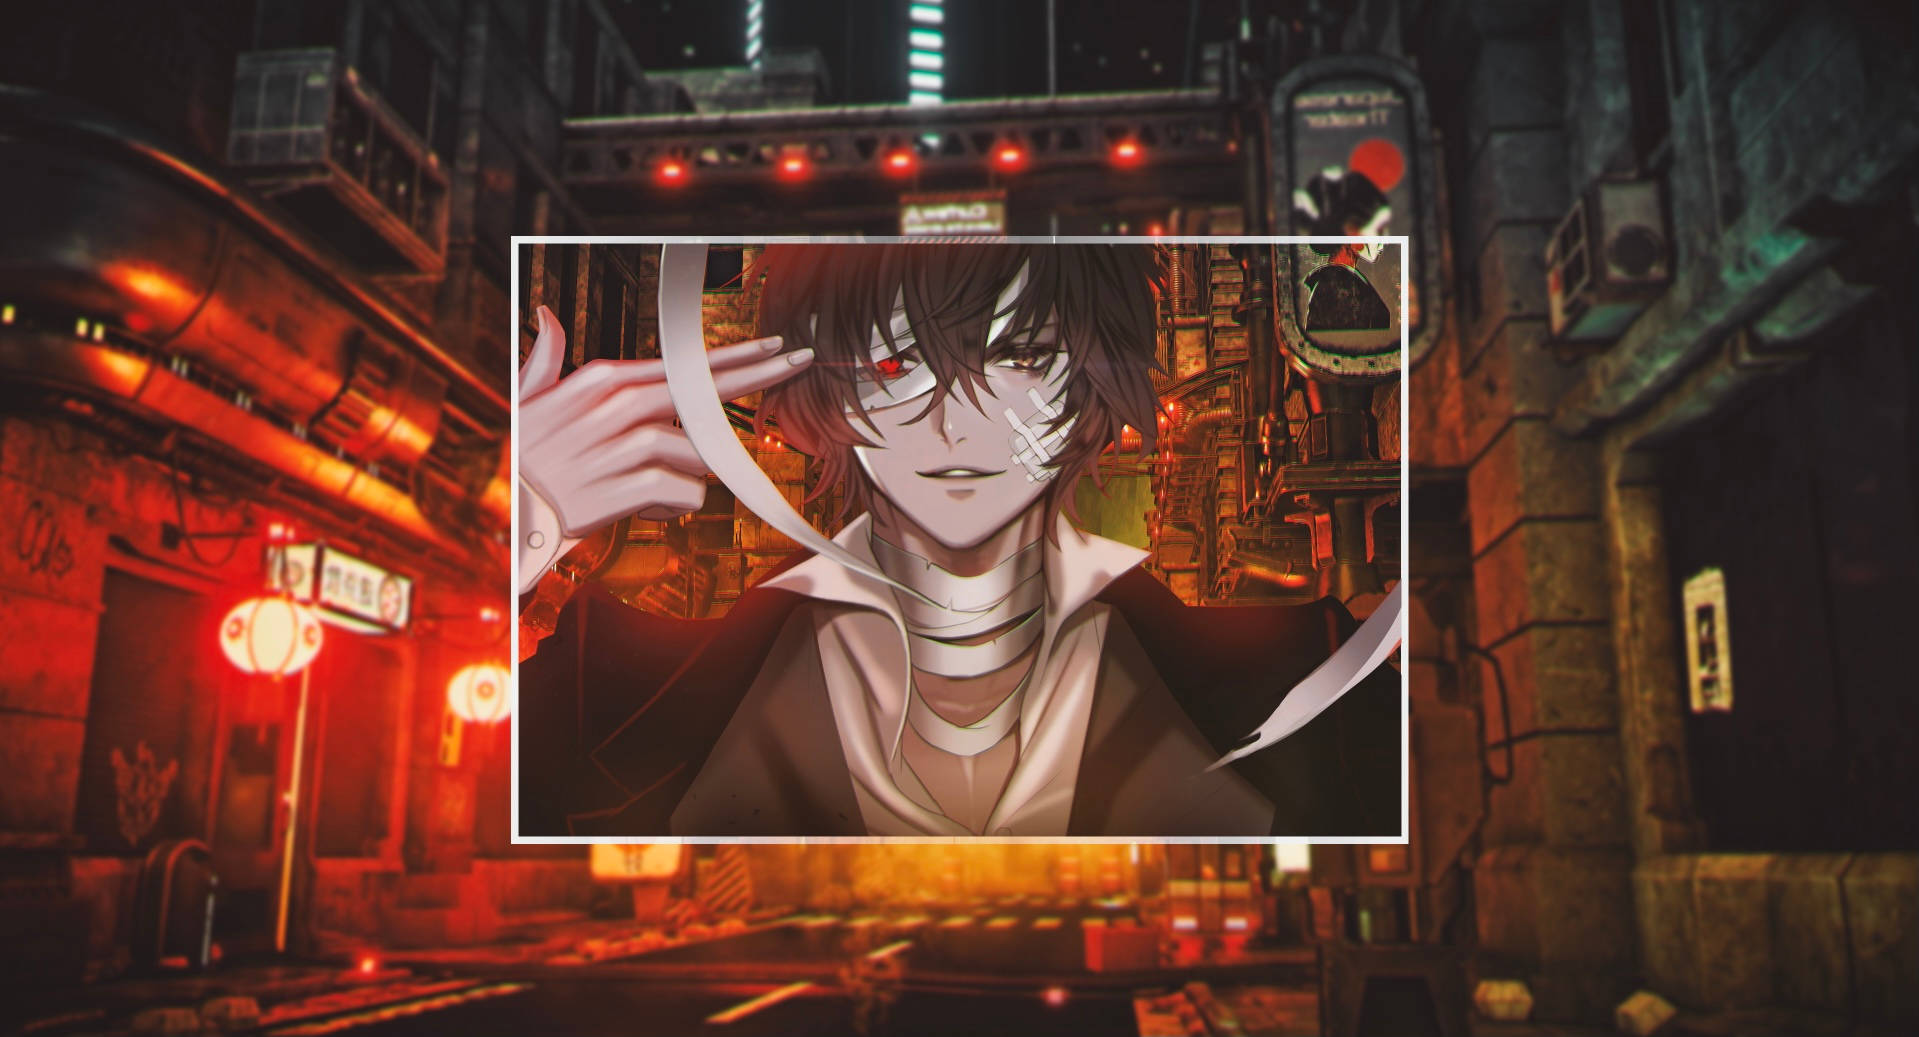 Dazai Against A Glowing City Background